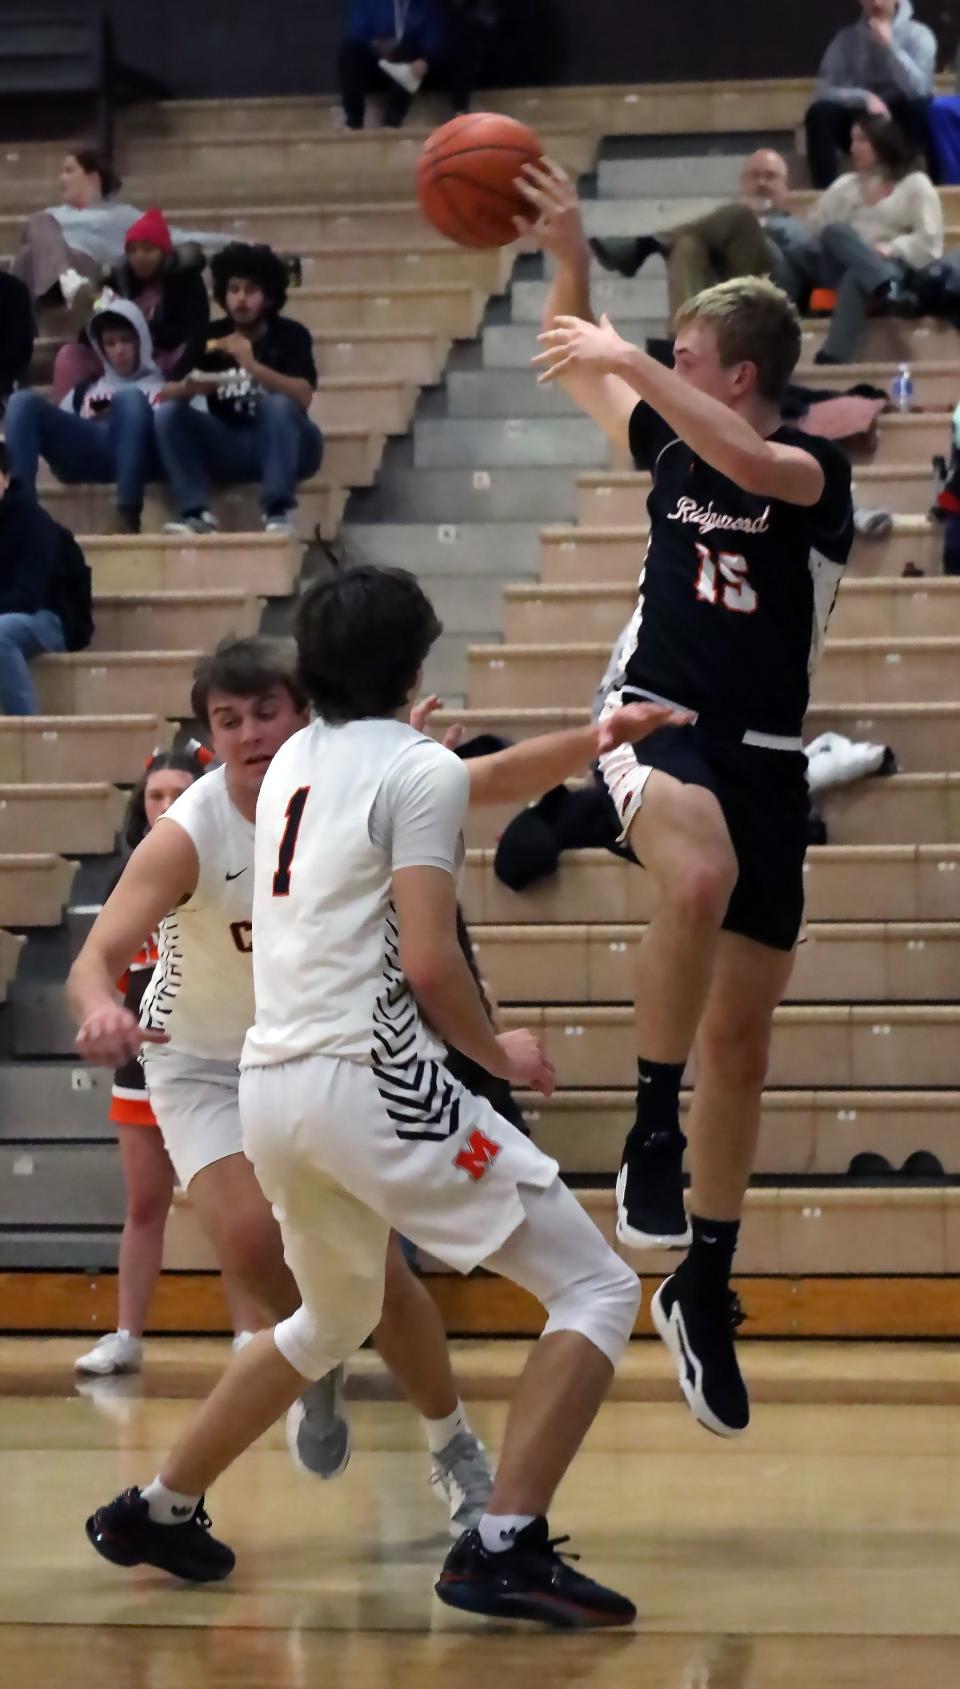 Ridgewood's Grant Lahmers (15) passes the ball during the Colts versus Generals basketball game Tuesday evening at Meadowbrook High School.